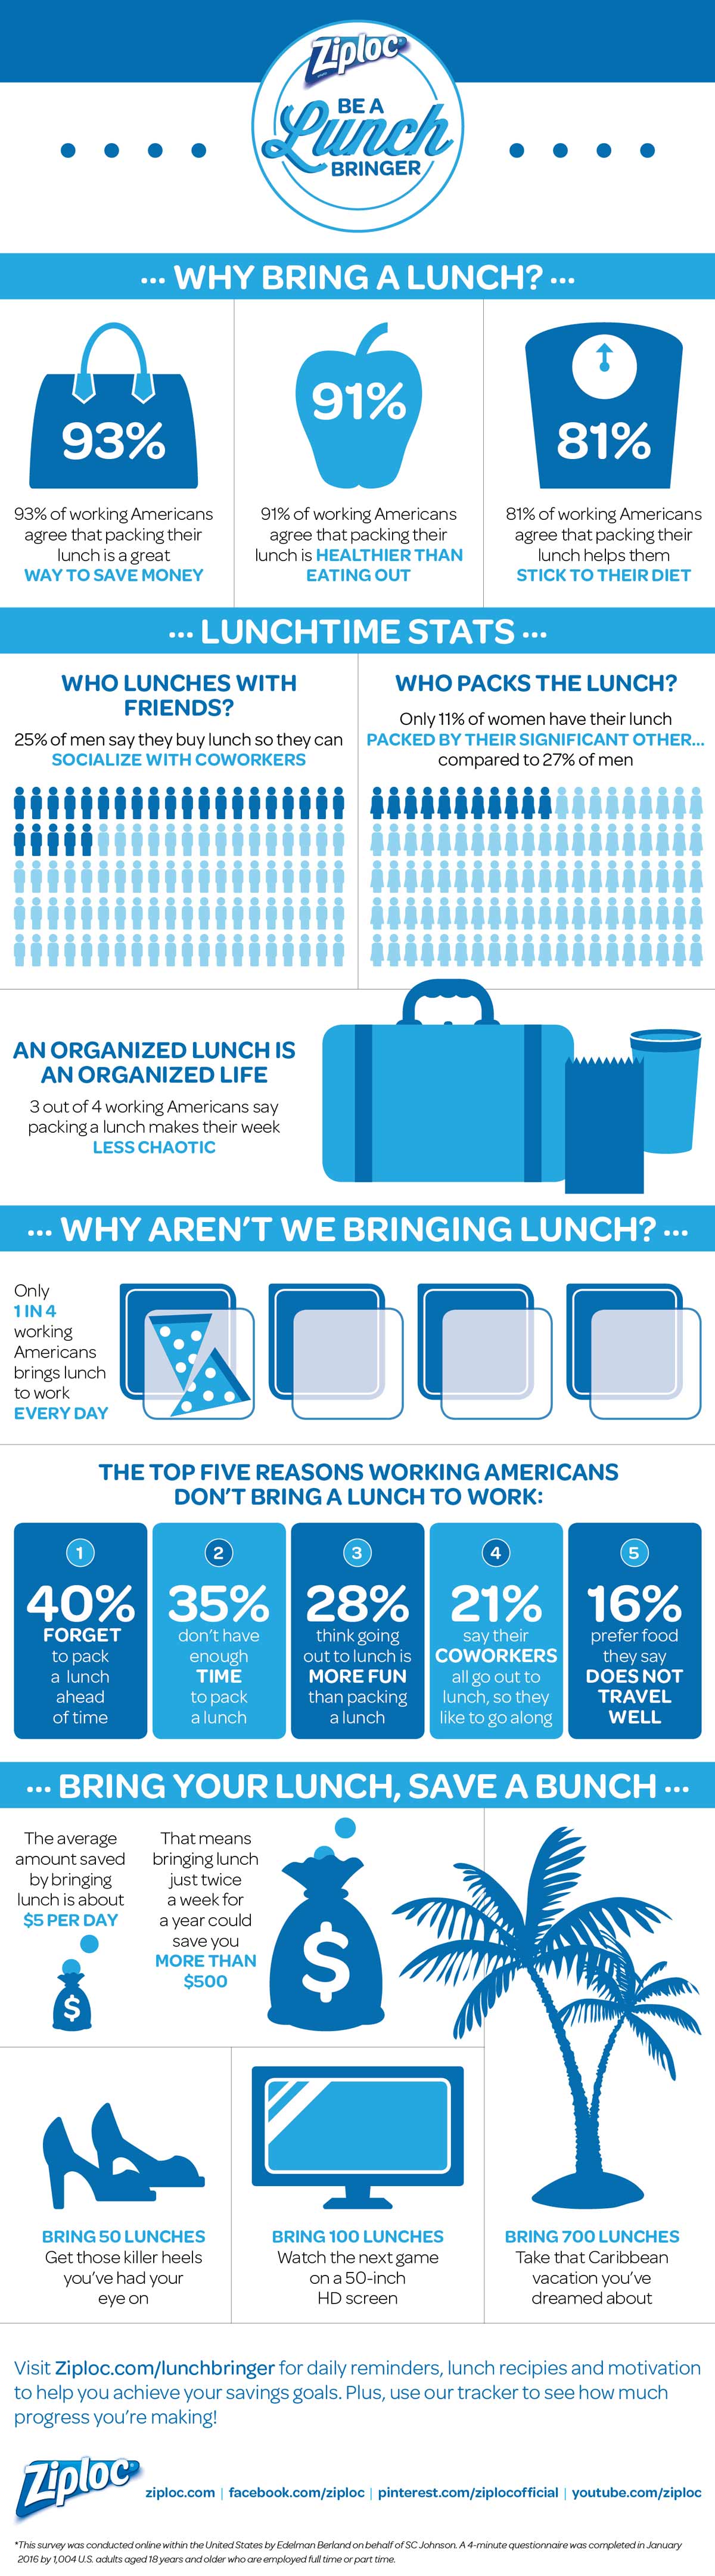 "Be a Lunch Bringer" infographic from Ziploc brand